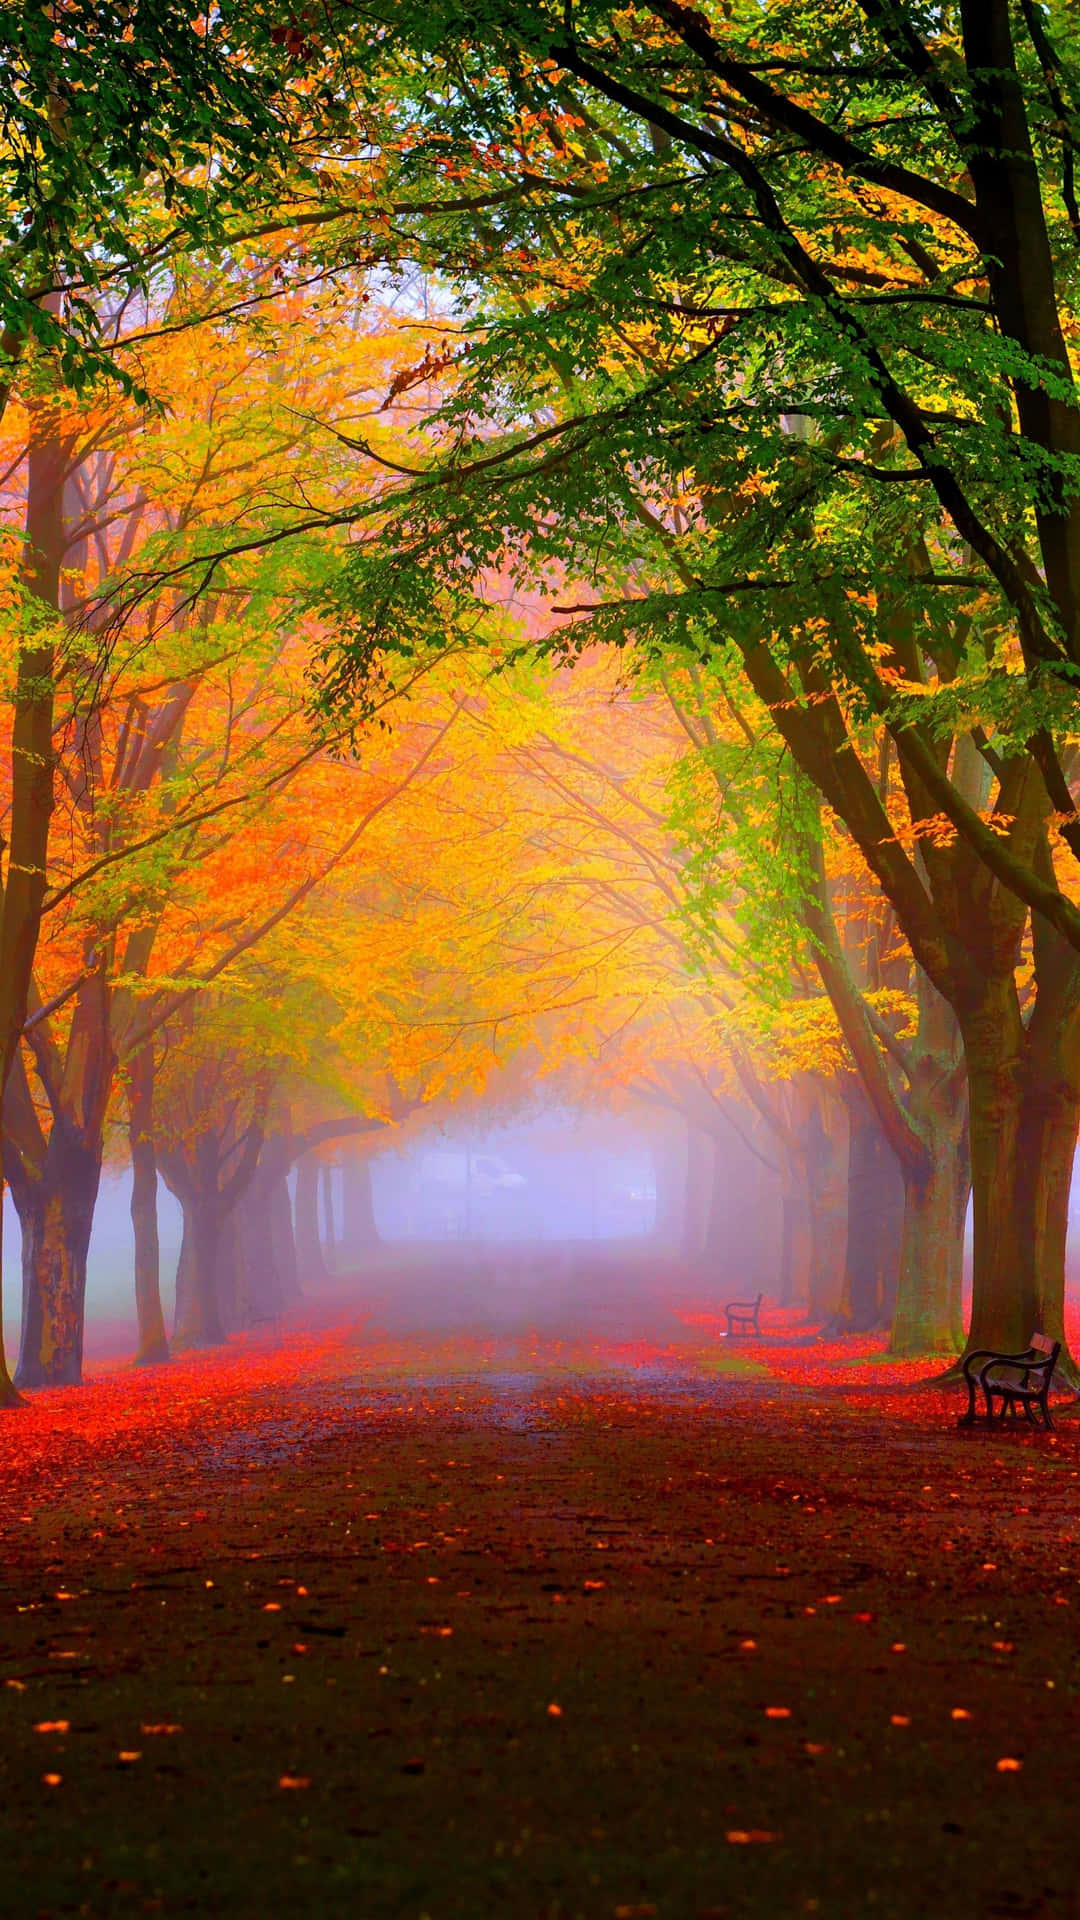 Download Enjoy The Falling Leaves Of Autumn Wallpaper | Wallpapers.com